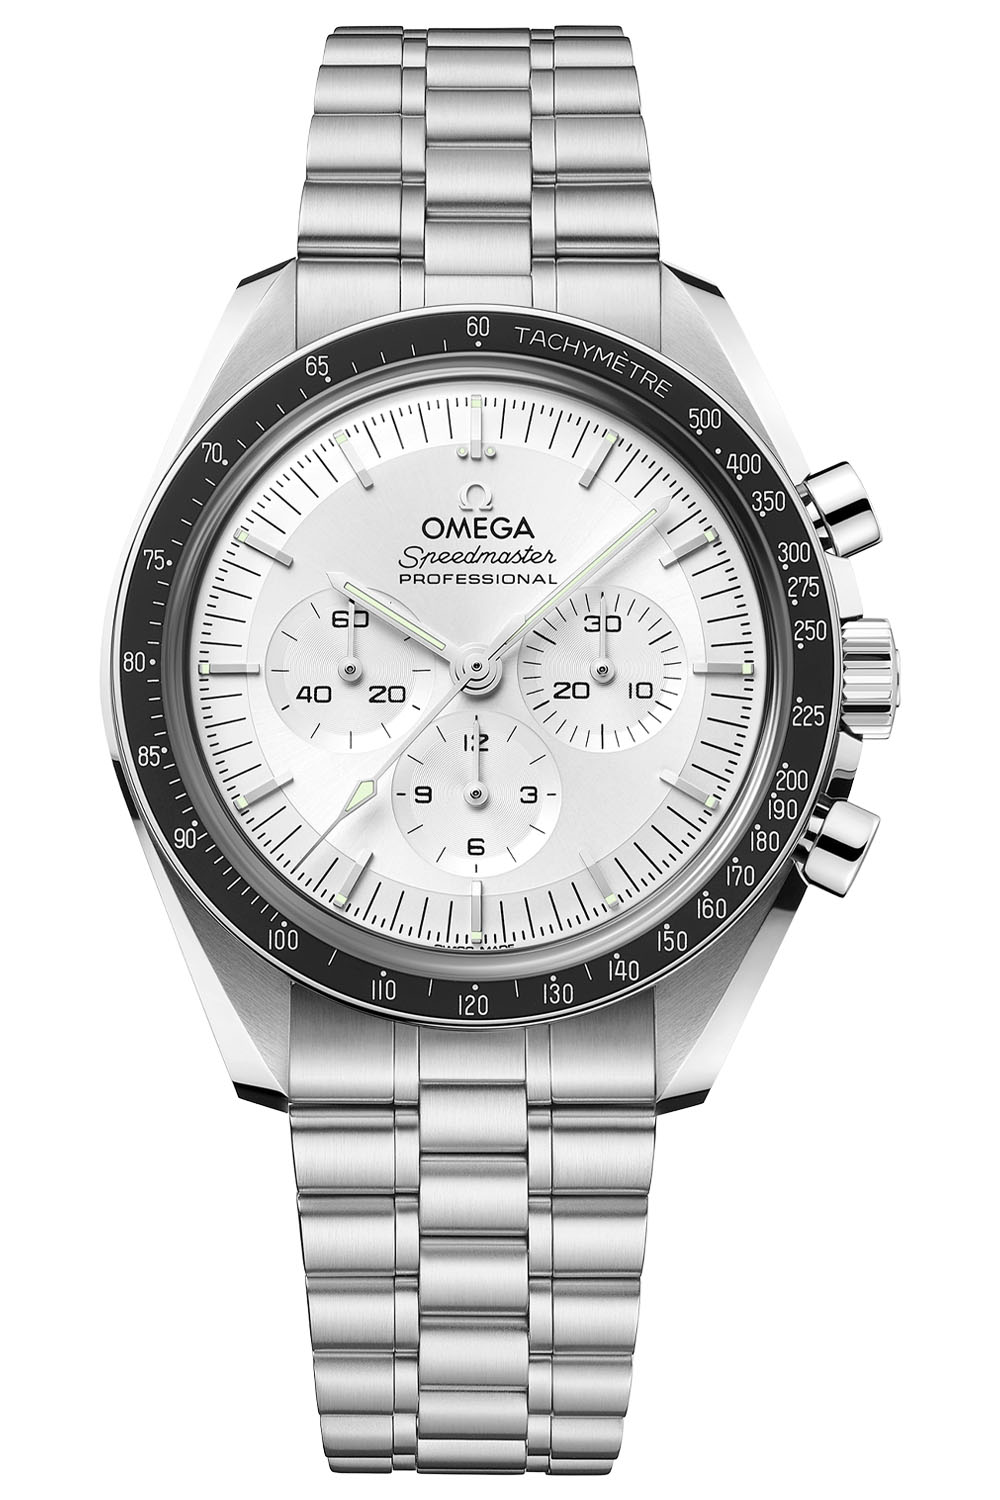 Omega Speedmaster Moonwatch Professional Master Chronometer Canopus silver dial